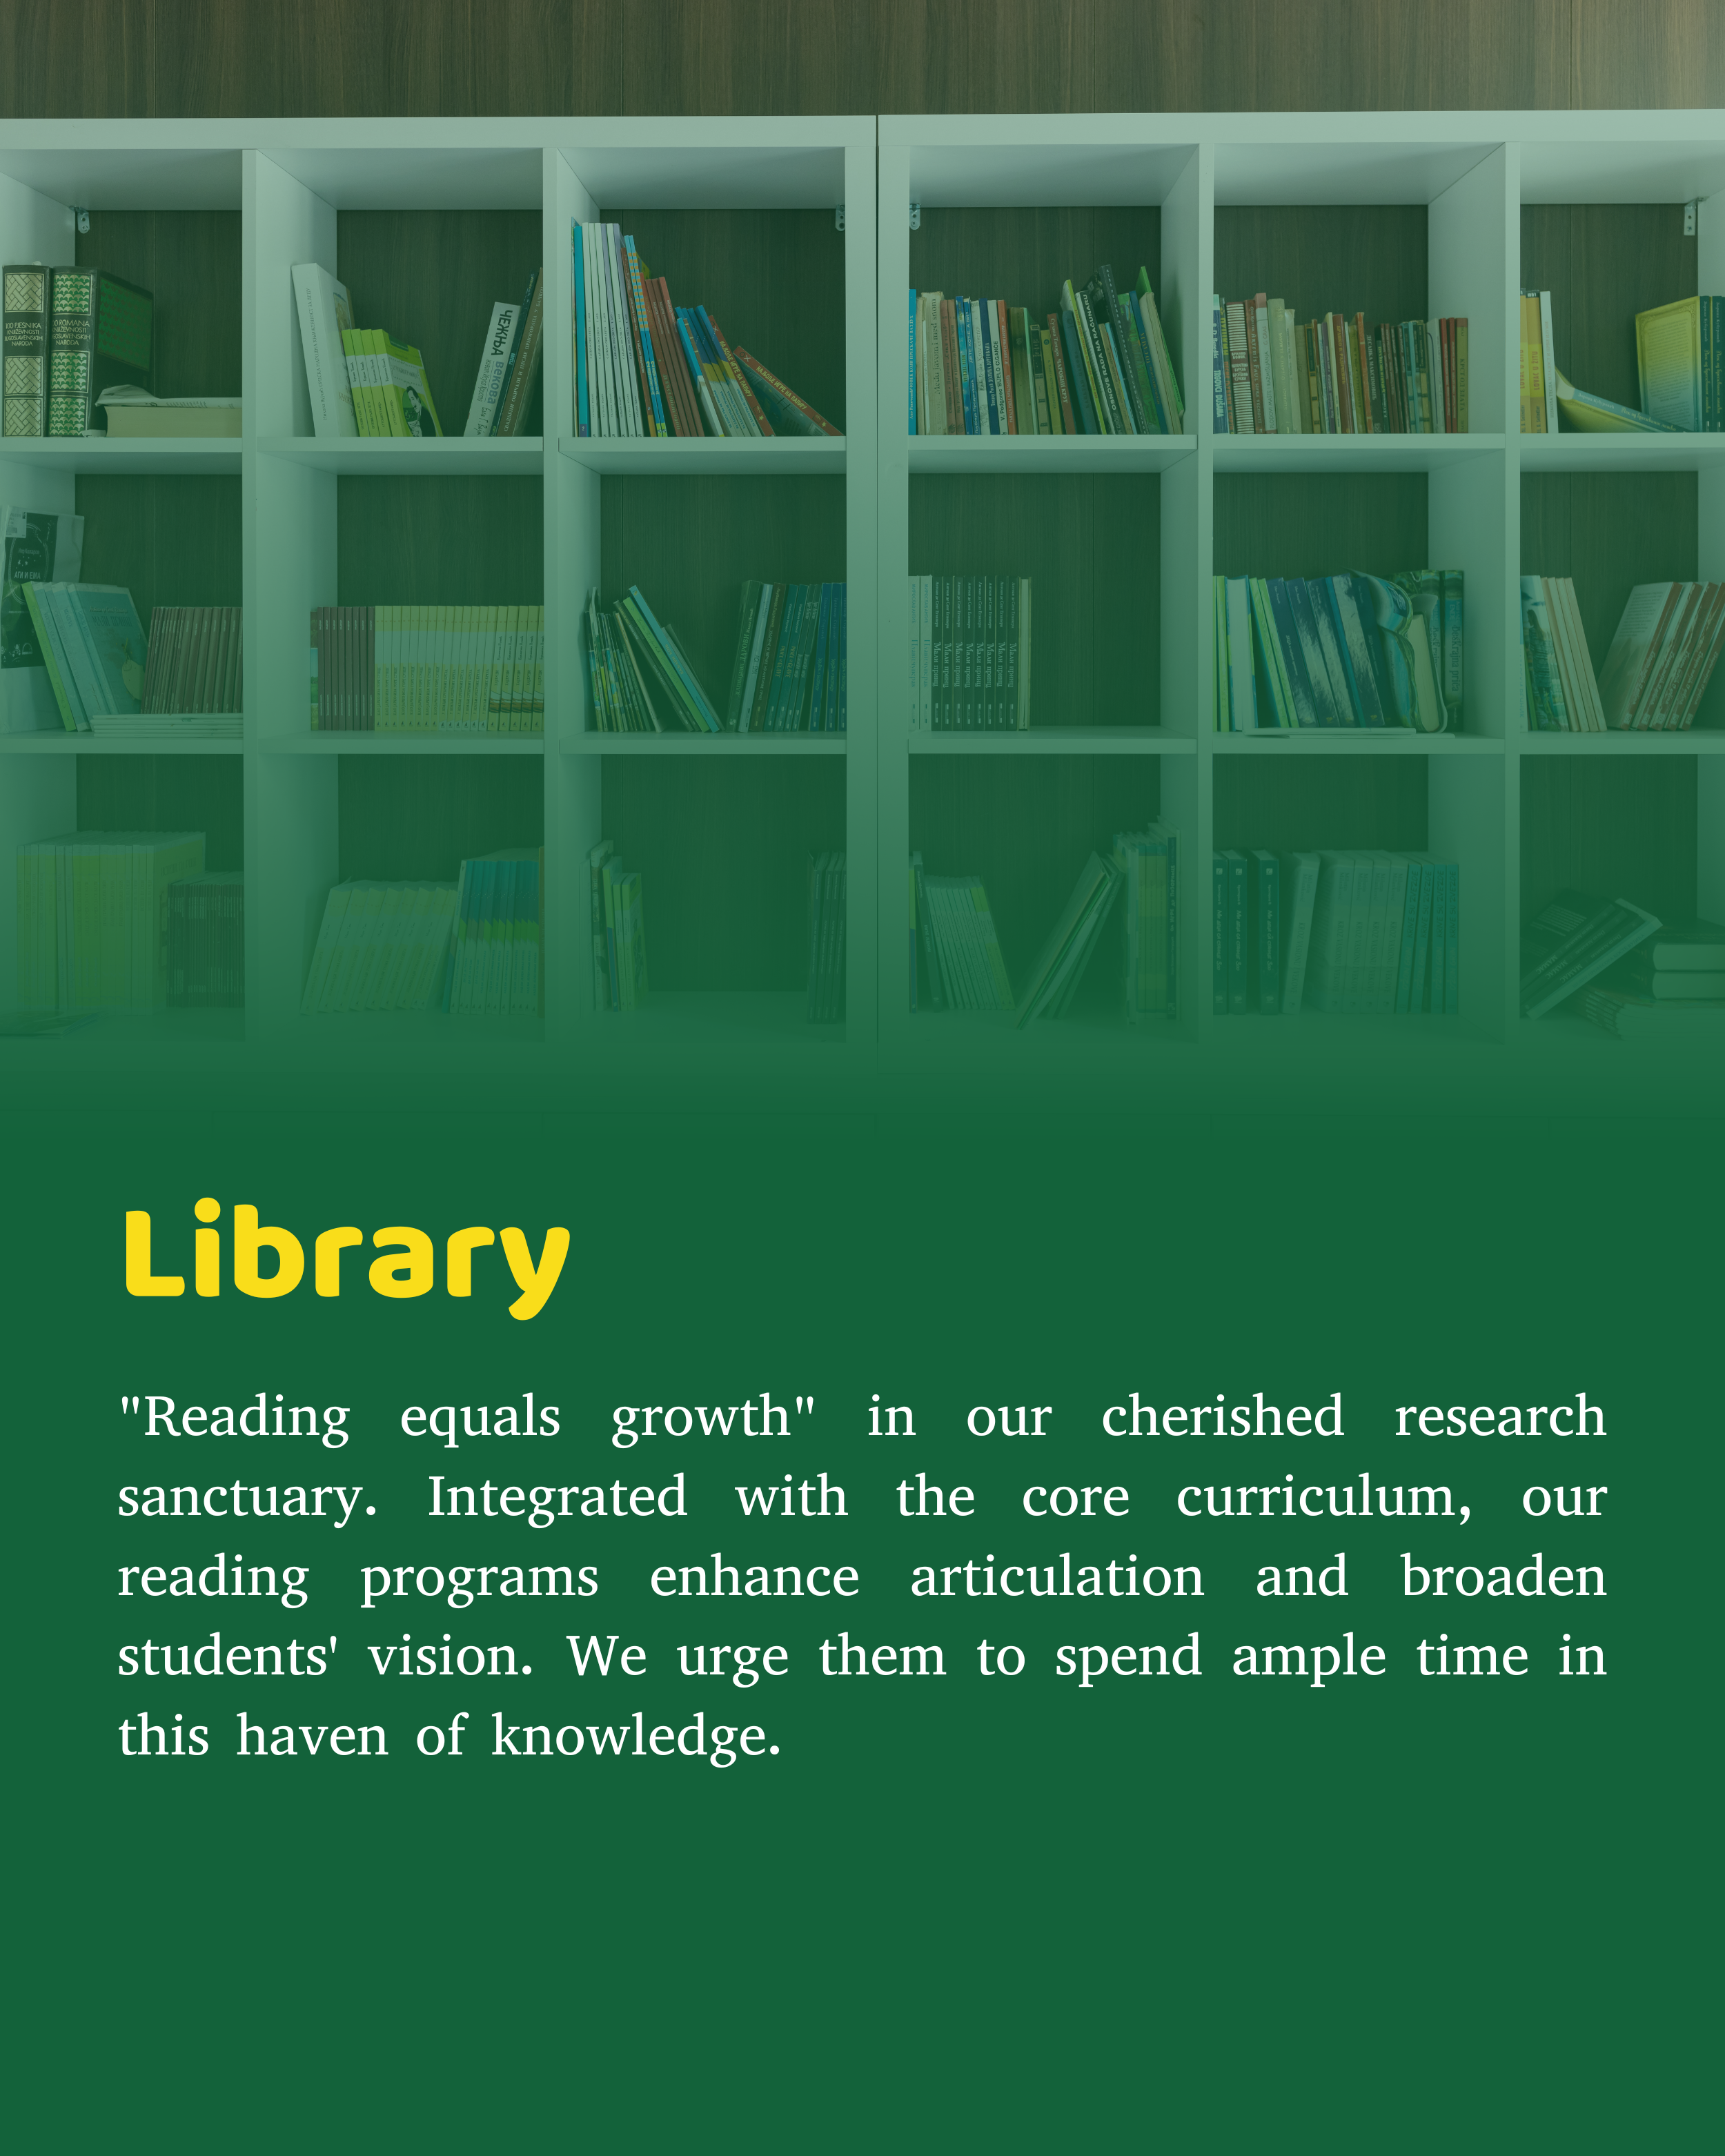 “Reading is synonymous to growth”… This silent sanctuary for research is our pride and joy. Our reading programs are integrated with the core curriculum making our students more articulate and broadening their vision. We encourage our students to spend a considerable amount of their time in this haven of knowledge.